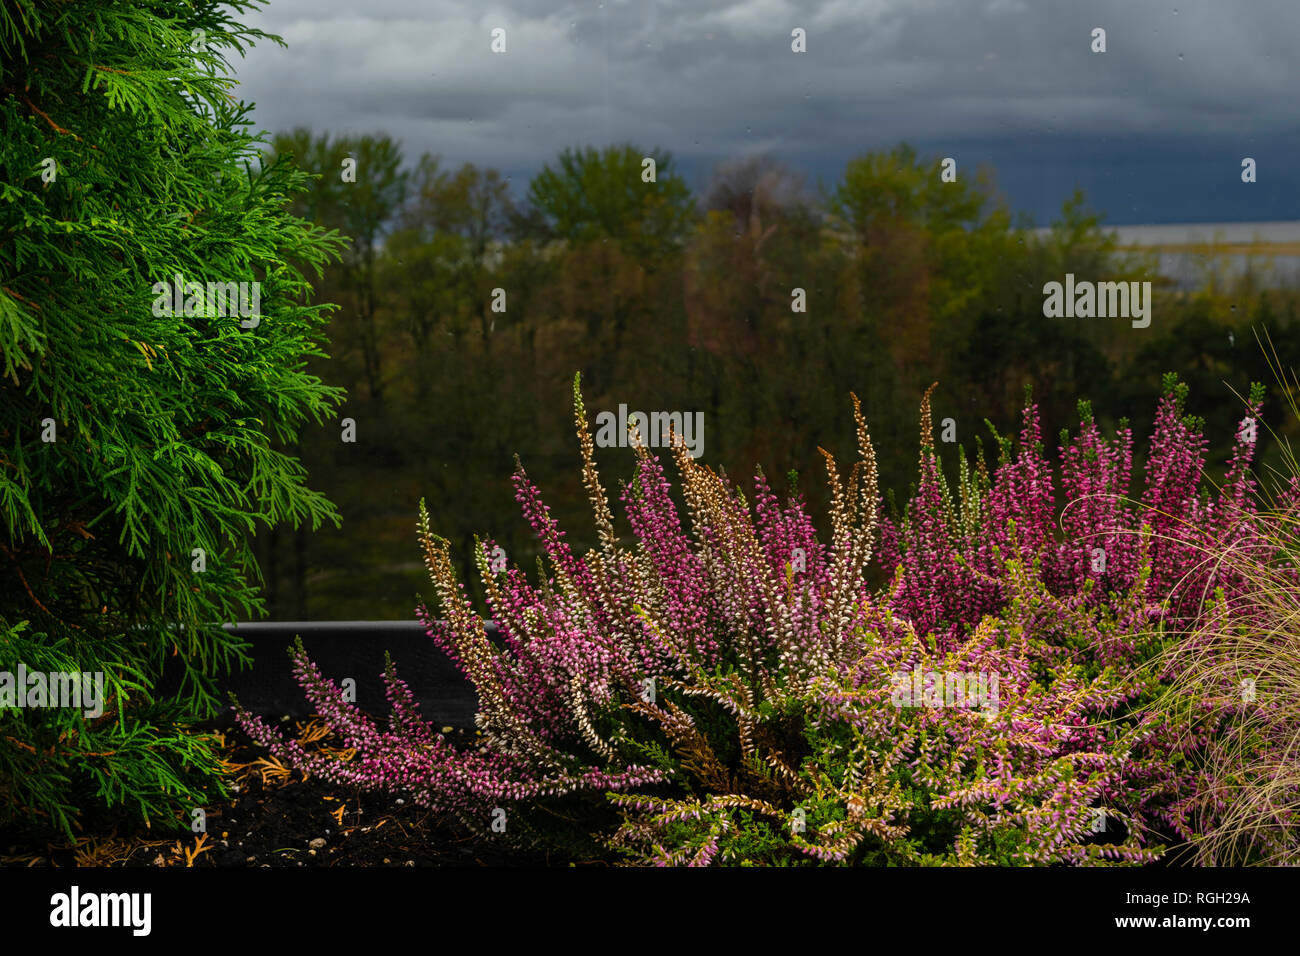 Purple heather, and spruce view from window in rainy day Stock Photo